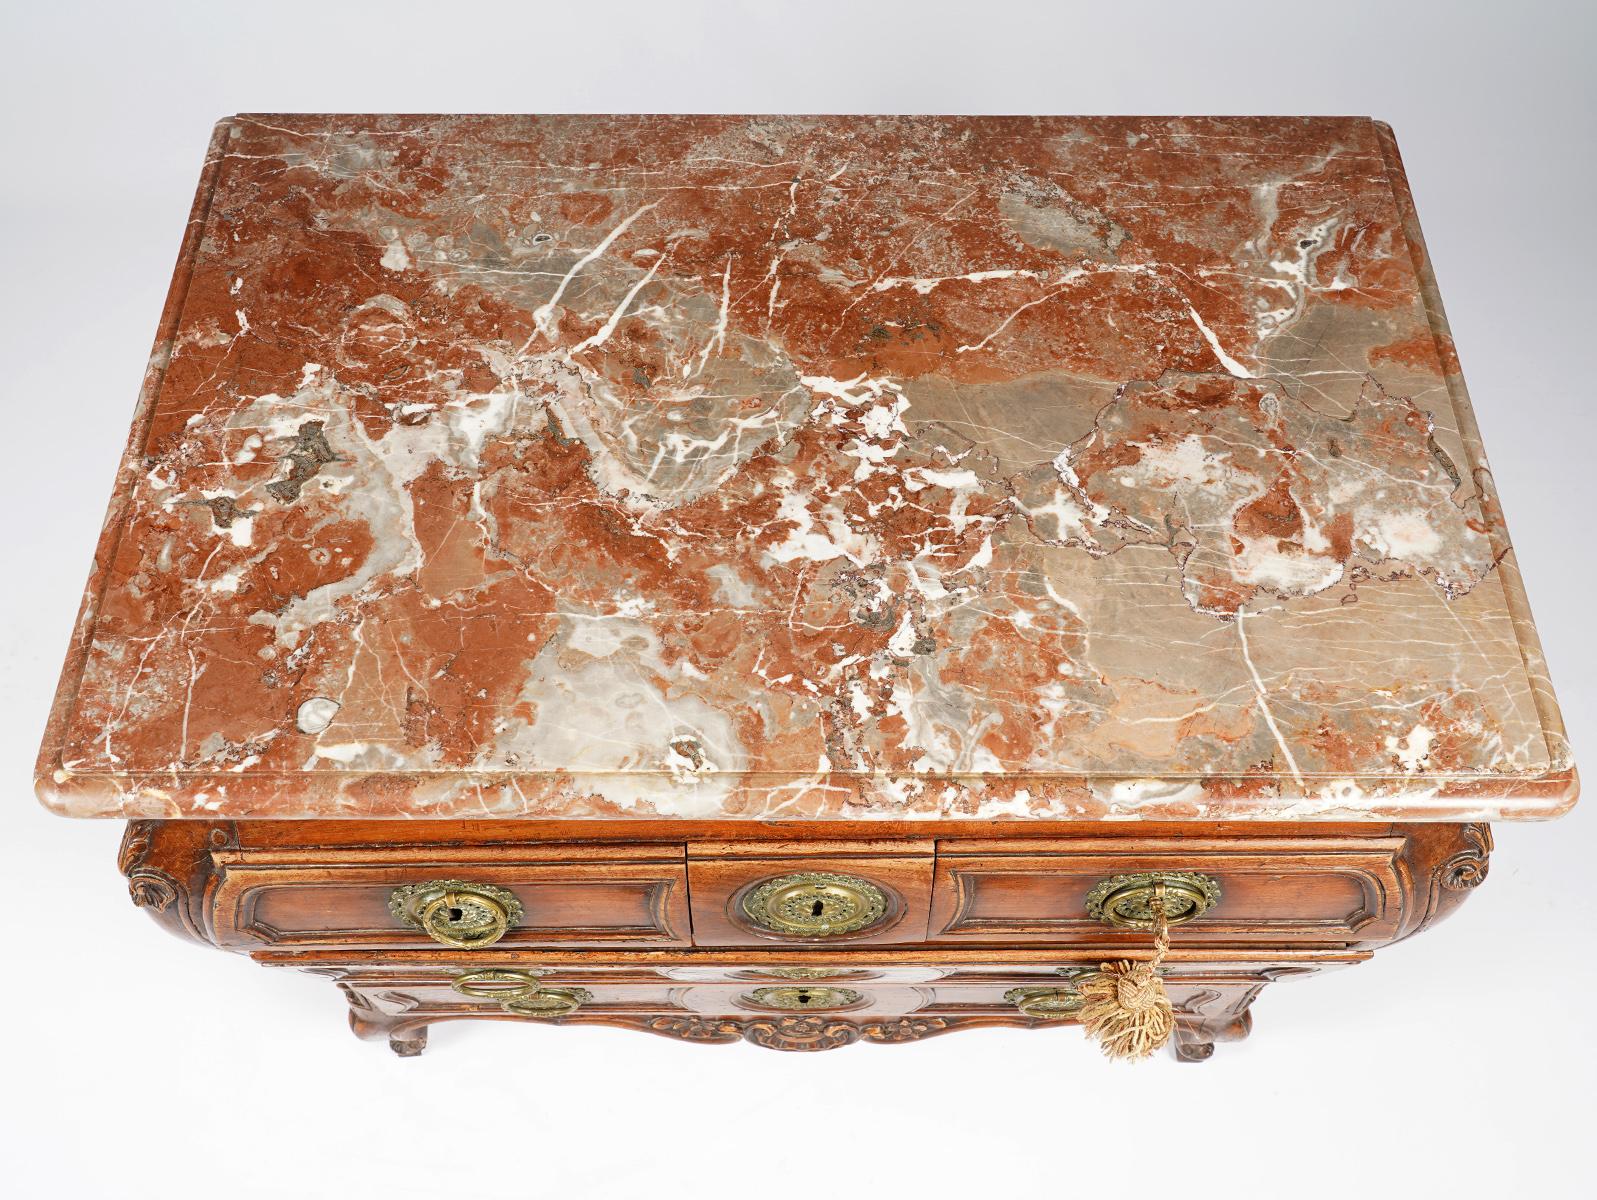 This French Provincial fruitwood marble-top commode is fashioned in the baroque style with elements from the Louis XV period. It dates to the first half of the 18th century. The commode features a gorgeous molded edge marble top above a richly